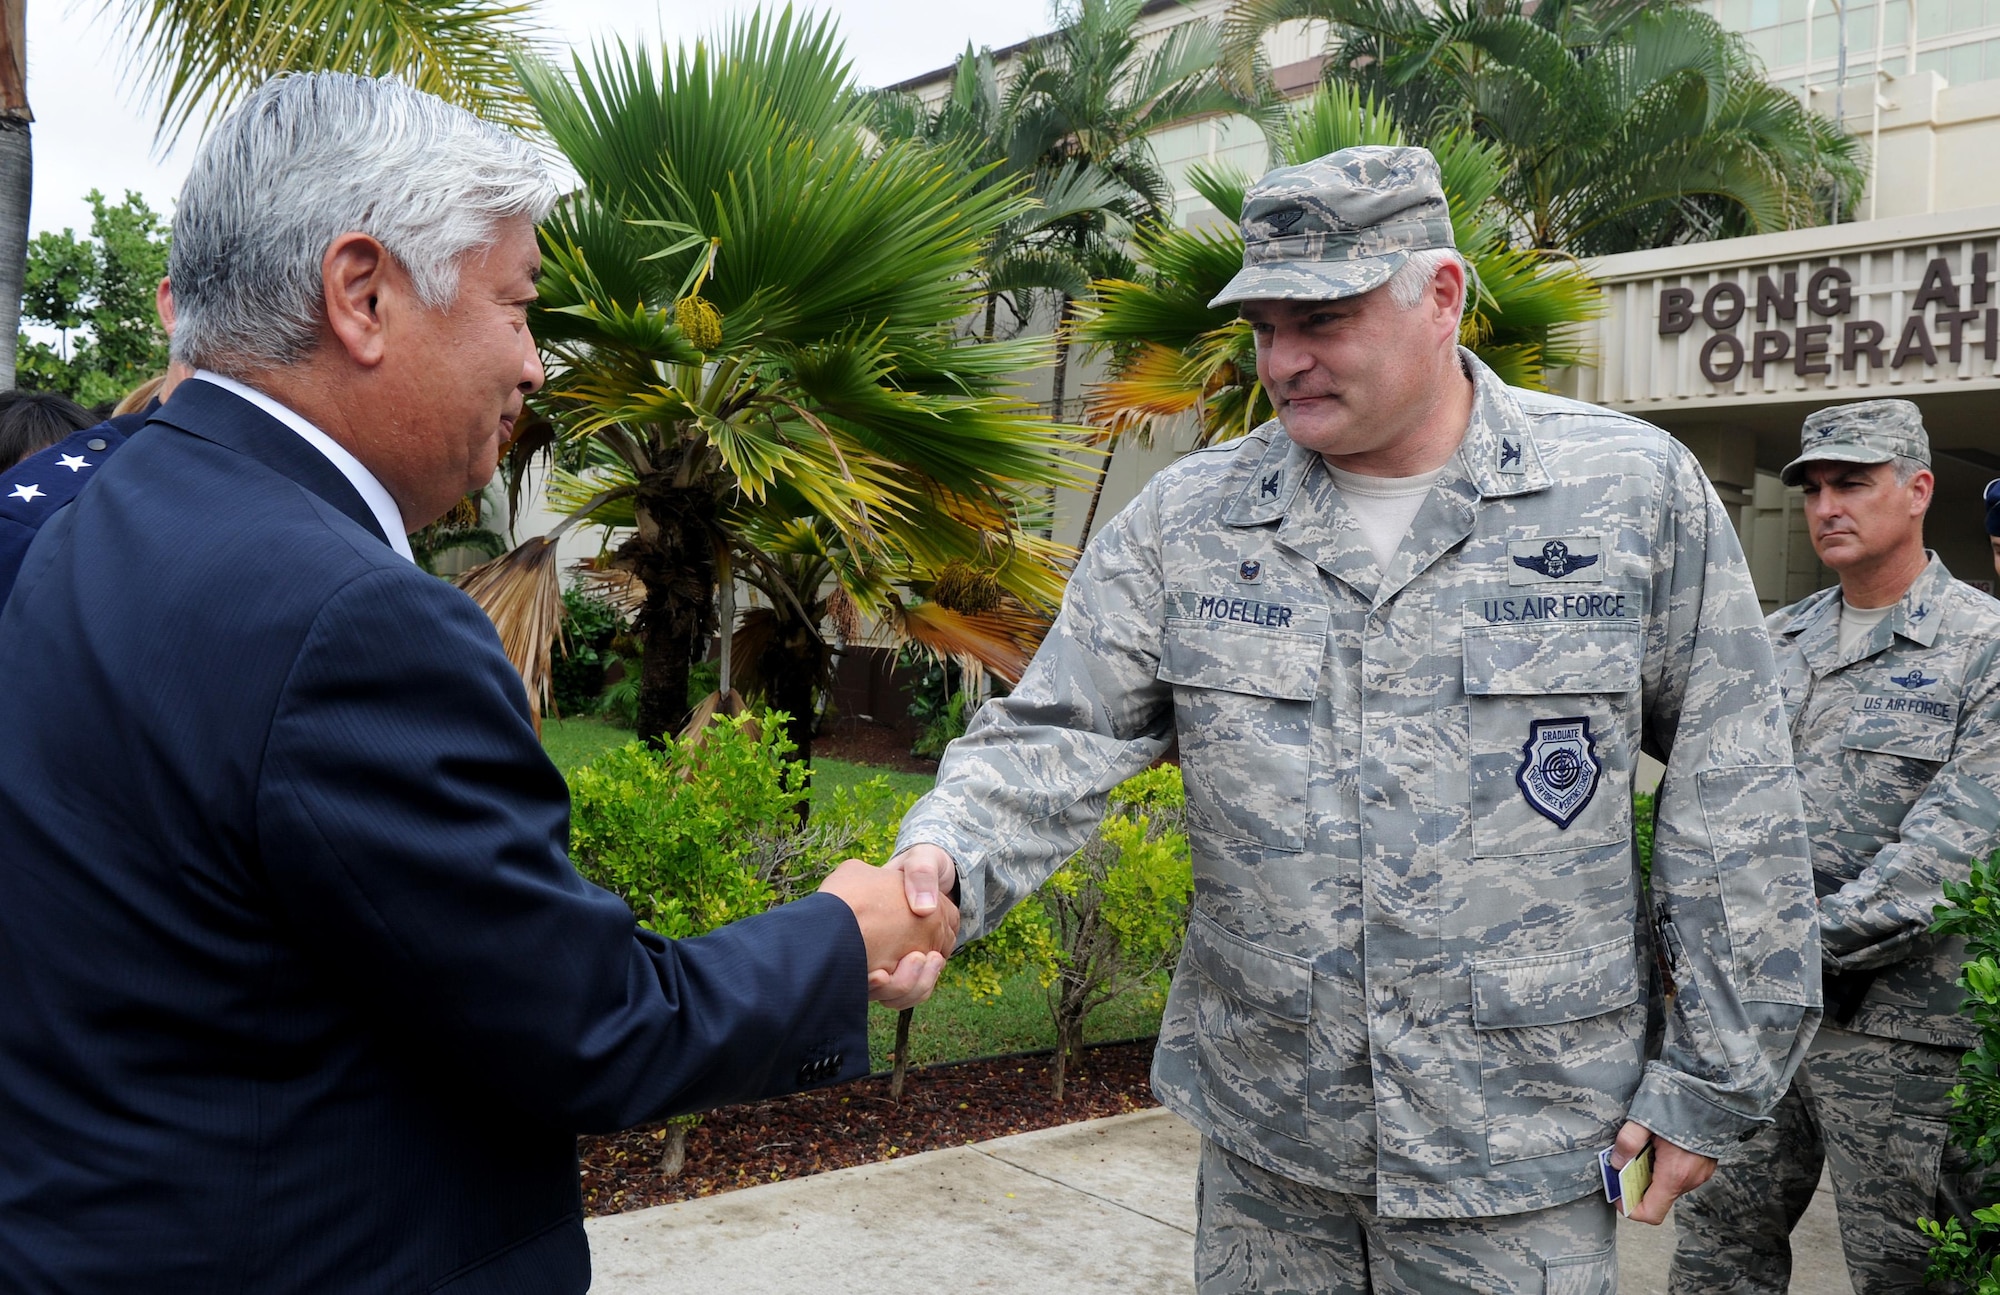 U.S. Air Force Col. David Moeller, 613th Air Operations Center commander, greets Japan Minister of Defense Gen Nakatani, during his visit to the 613th AOC Nov. 23, 2015, at Joint Base Pearl Harbor-Hickam, Hawaii. Nakatani and members of his defense forces were here to conduct bilateral talks with U.S. Pacific Command and PACAF about ongoing and future operations in the pacific. (U.S. Air Force photo by Staff Sgt. Alexander Martinez/Released)